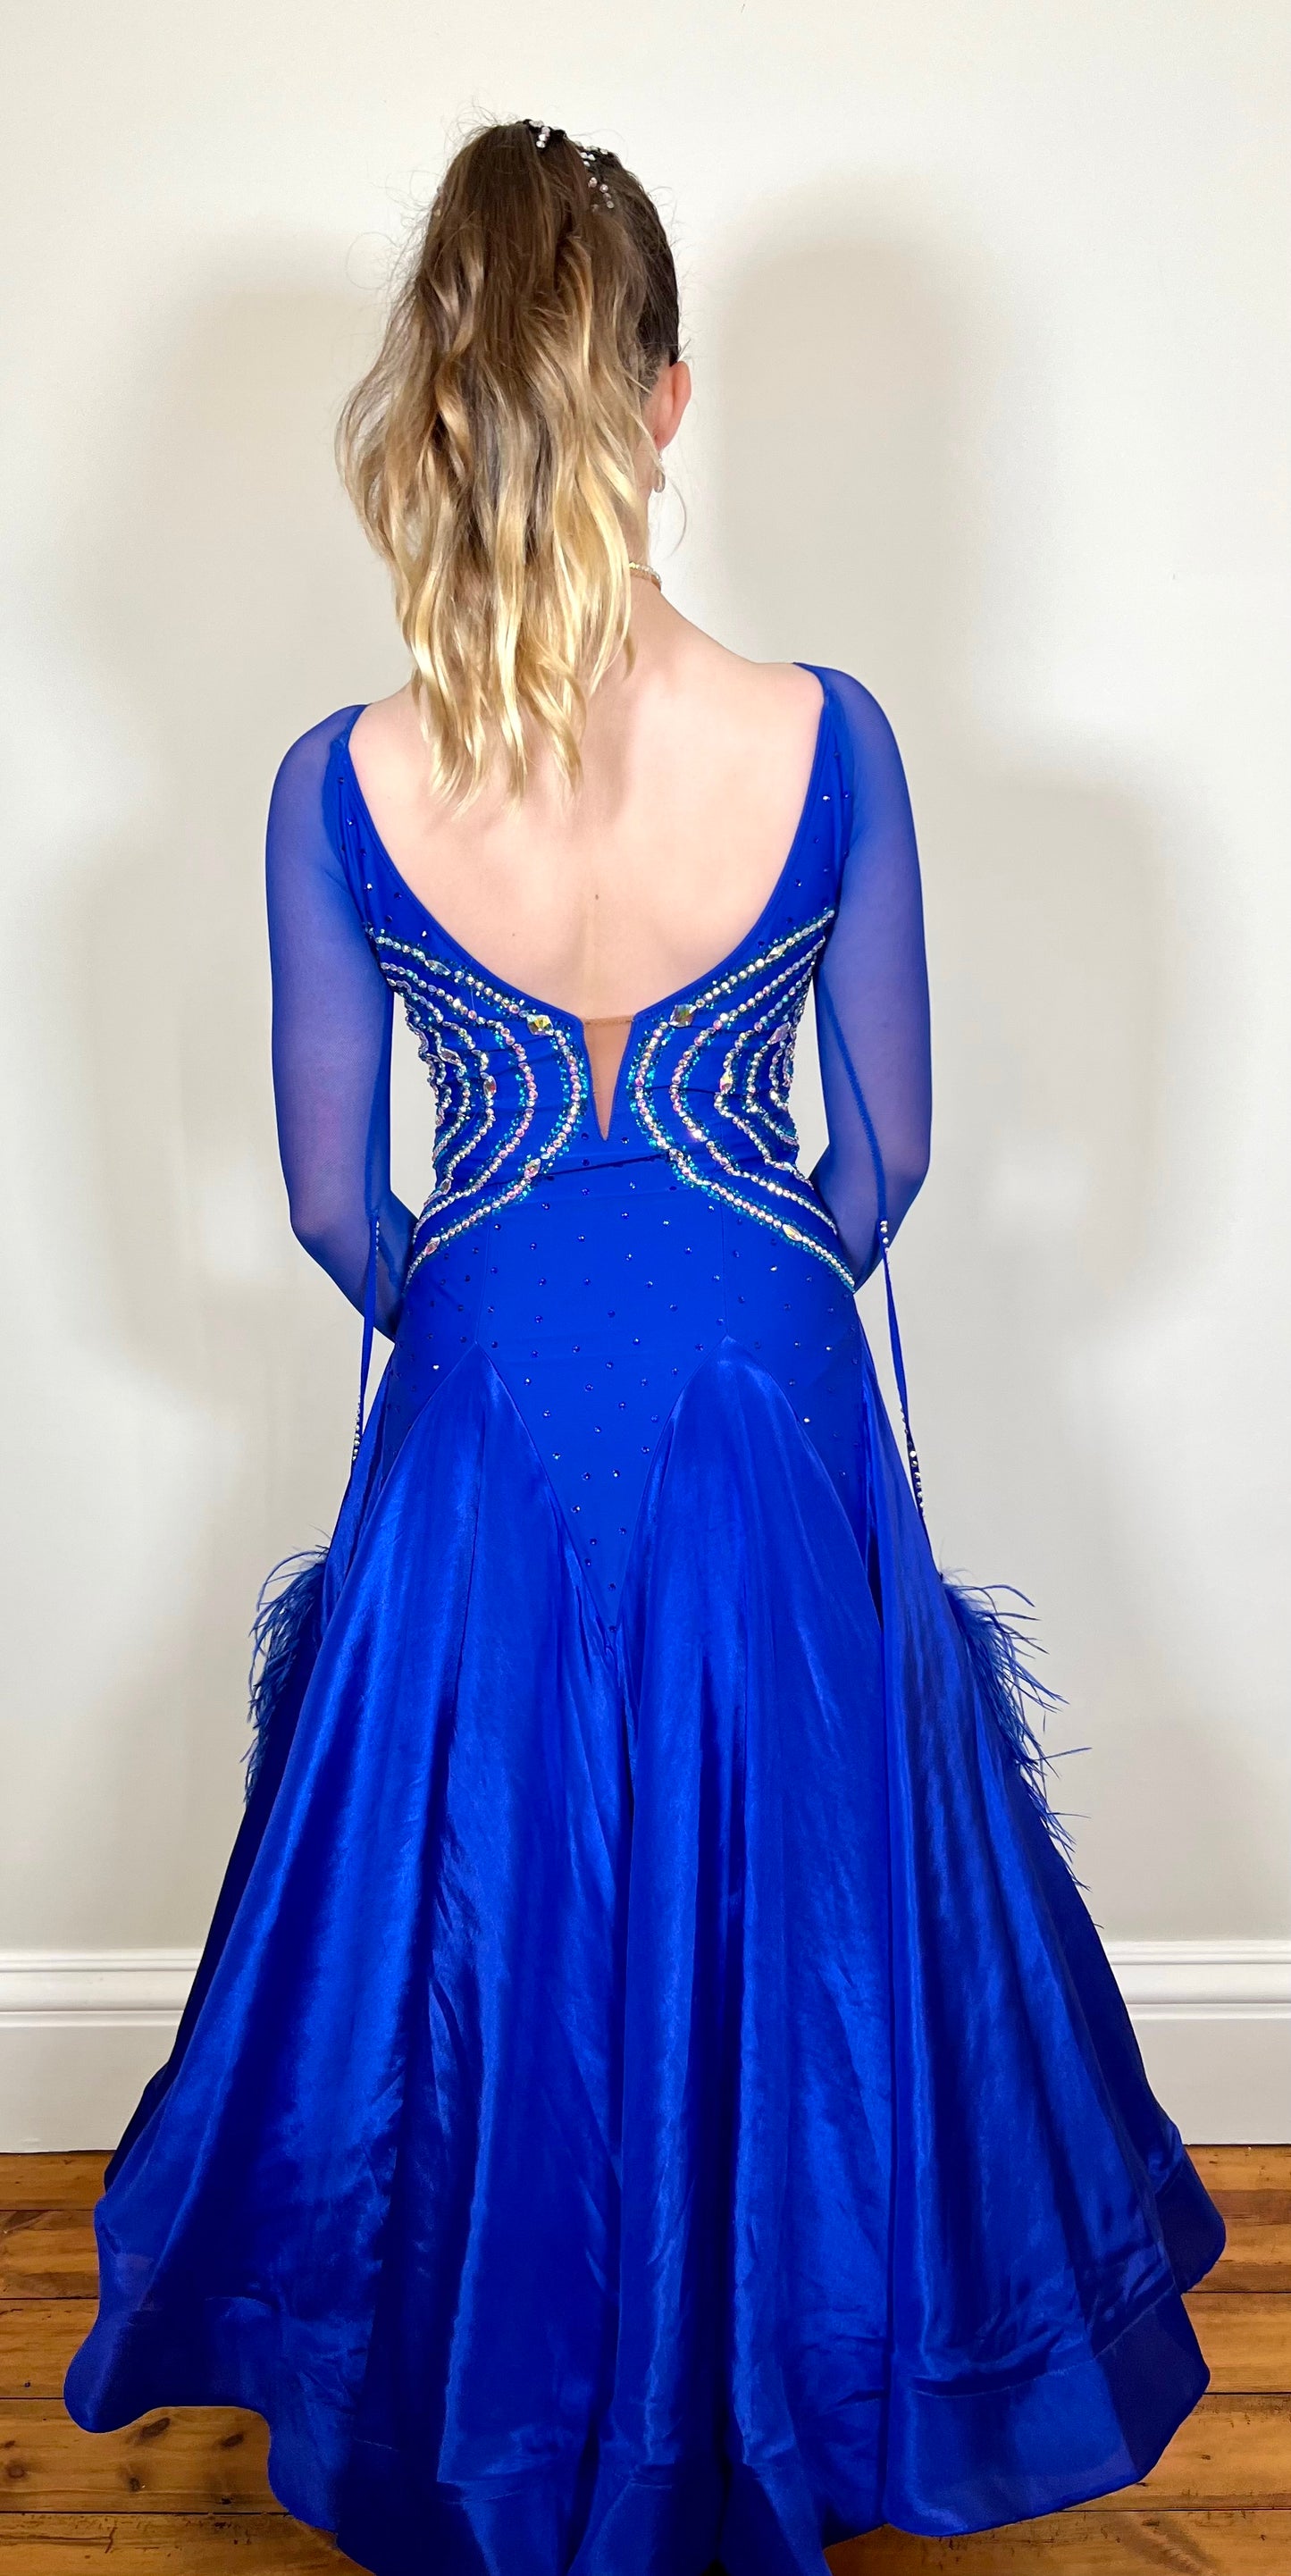 009 Bright Royal Blue Ballroom Dress. Blue & AB stoning detail with material stoned & ostrich feather floats